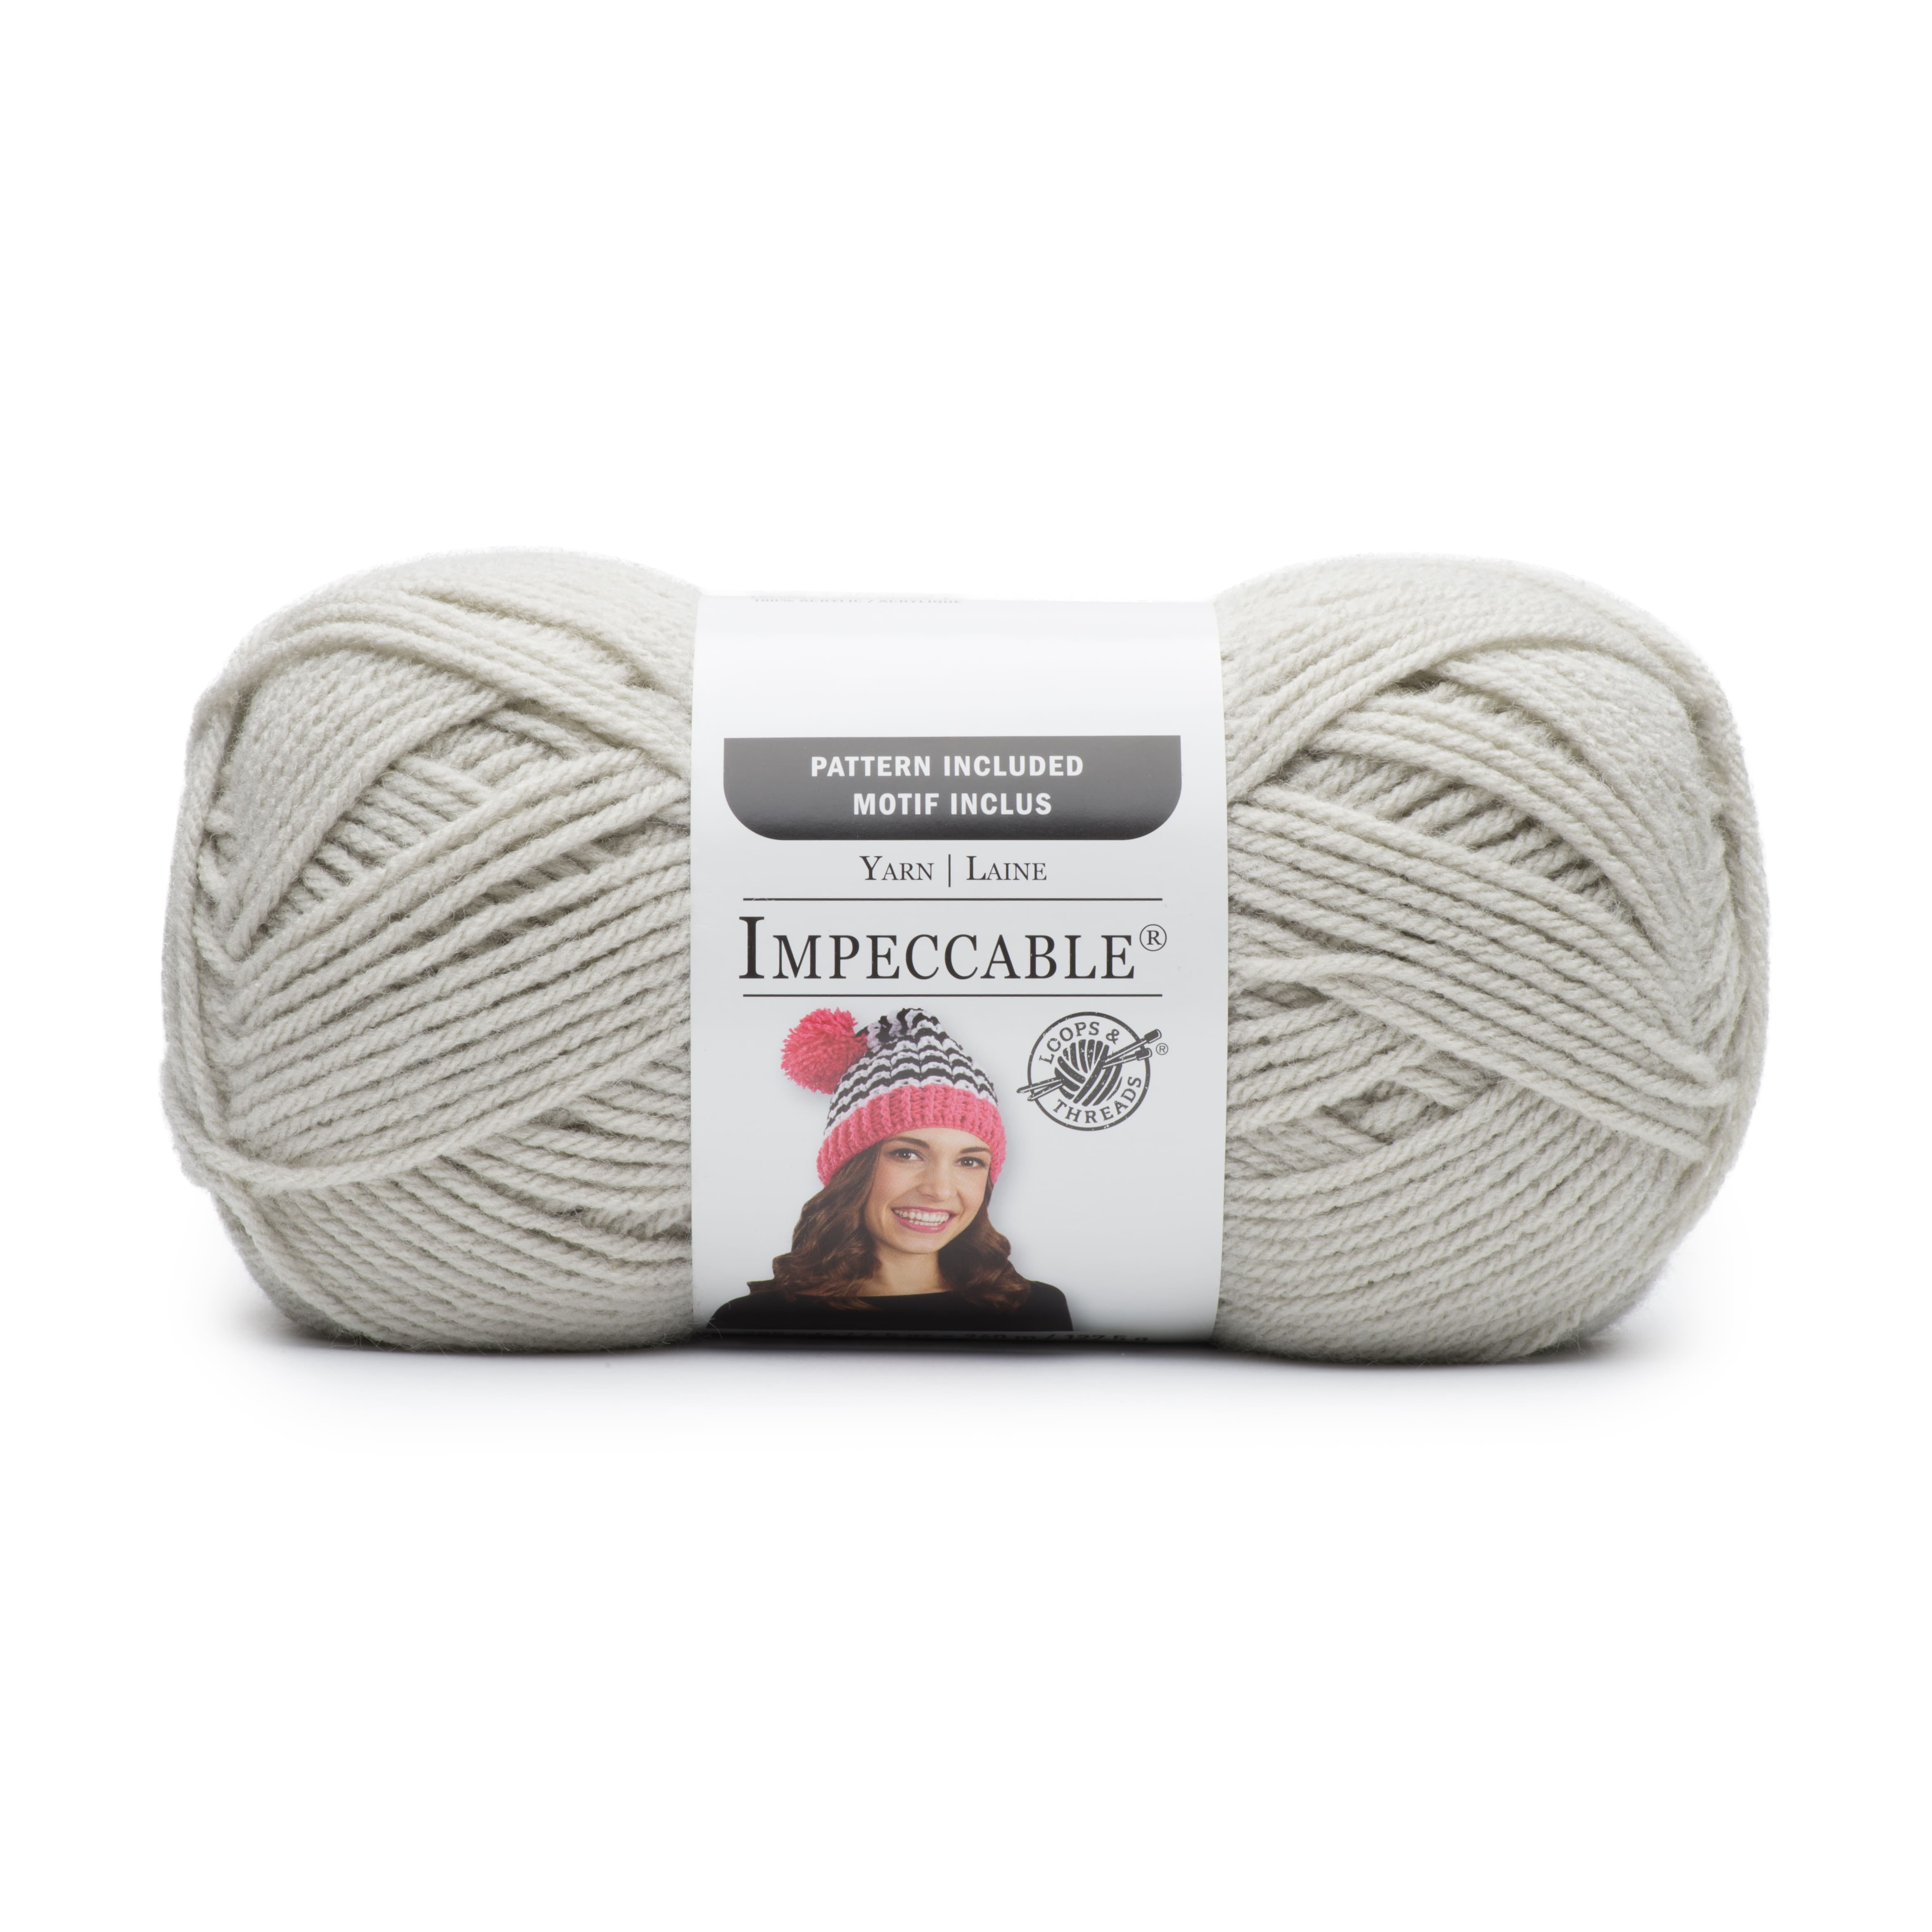 Loops & Threads Impeccable Yarn Independent Review